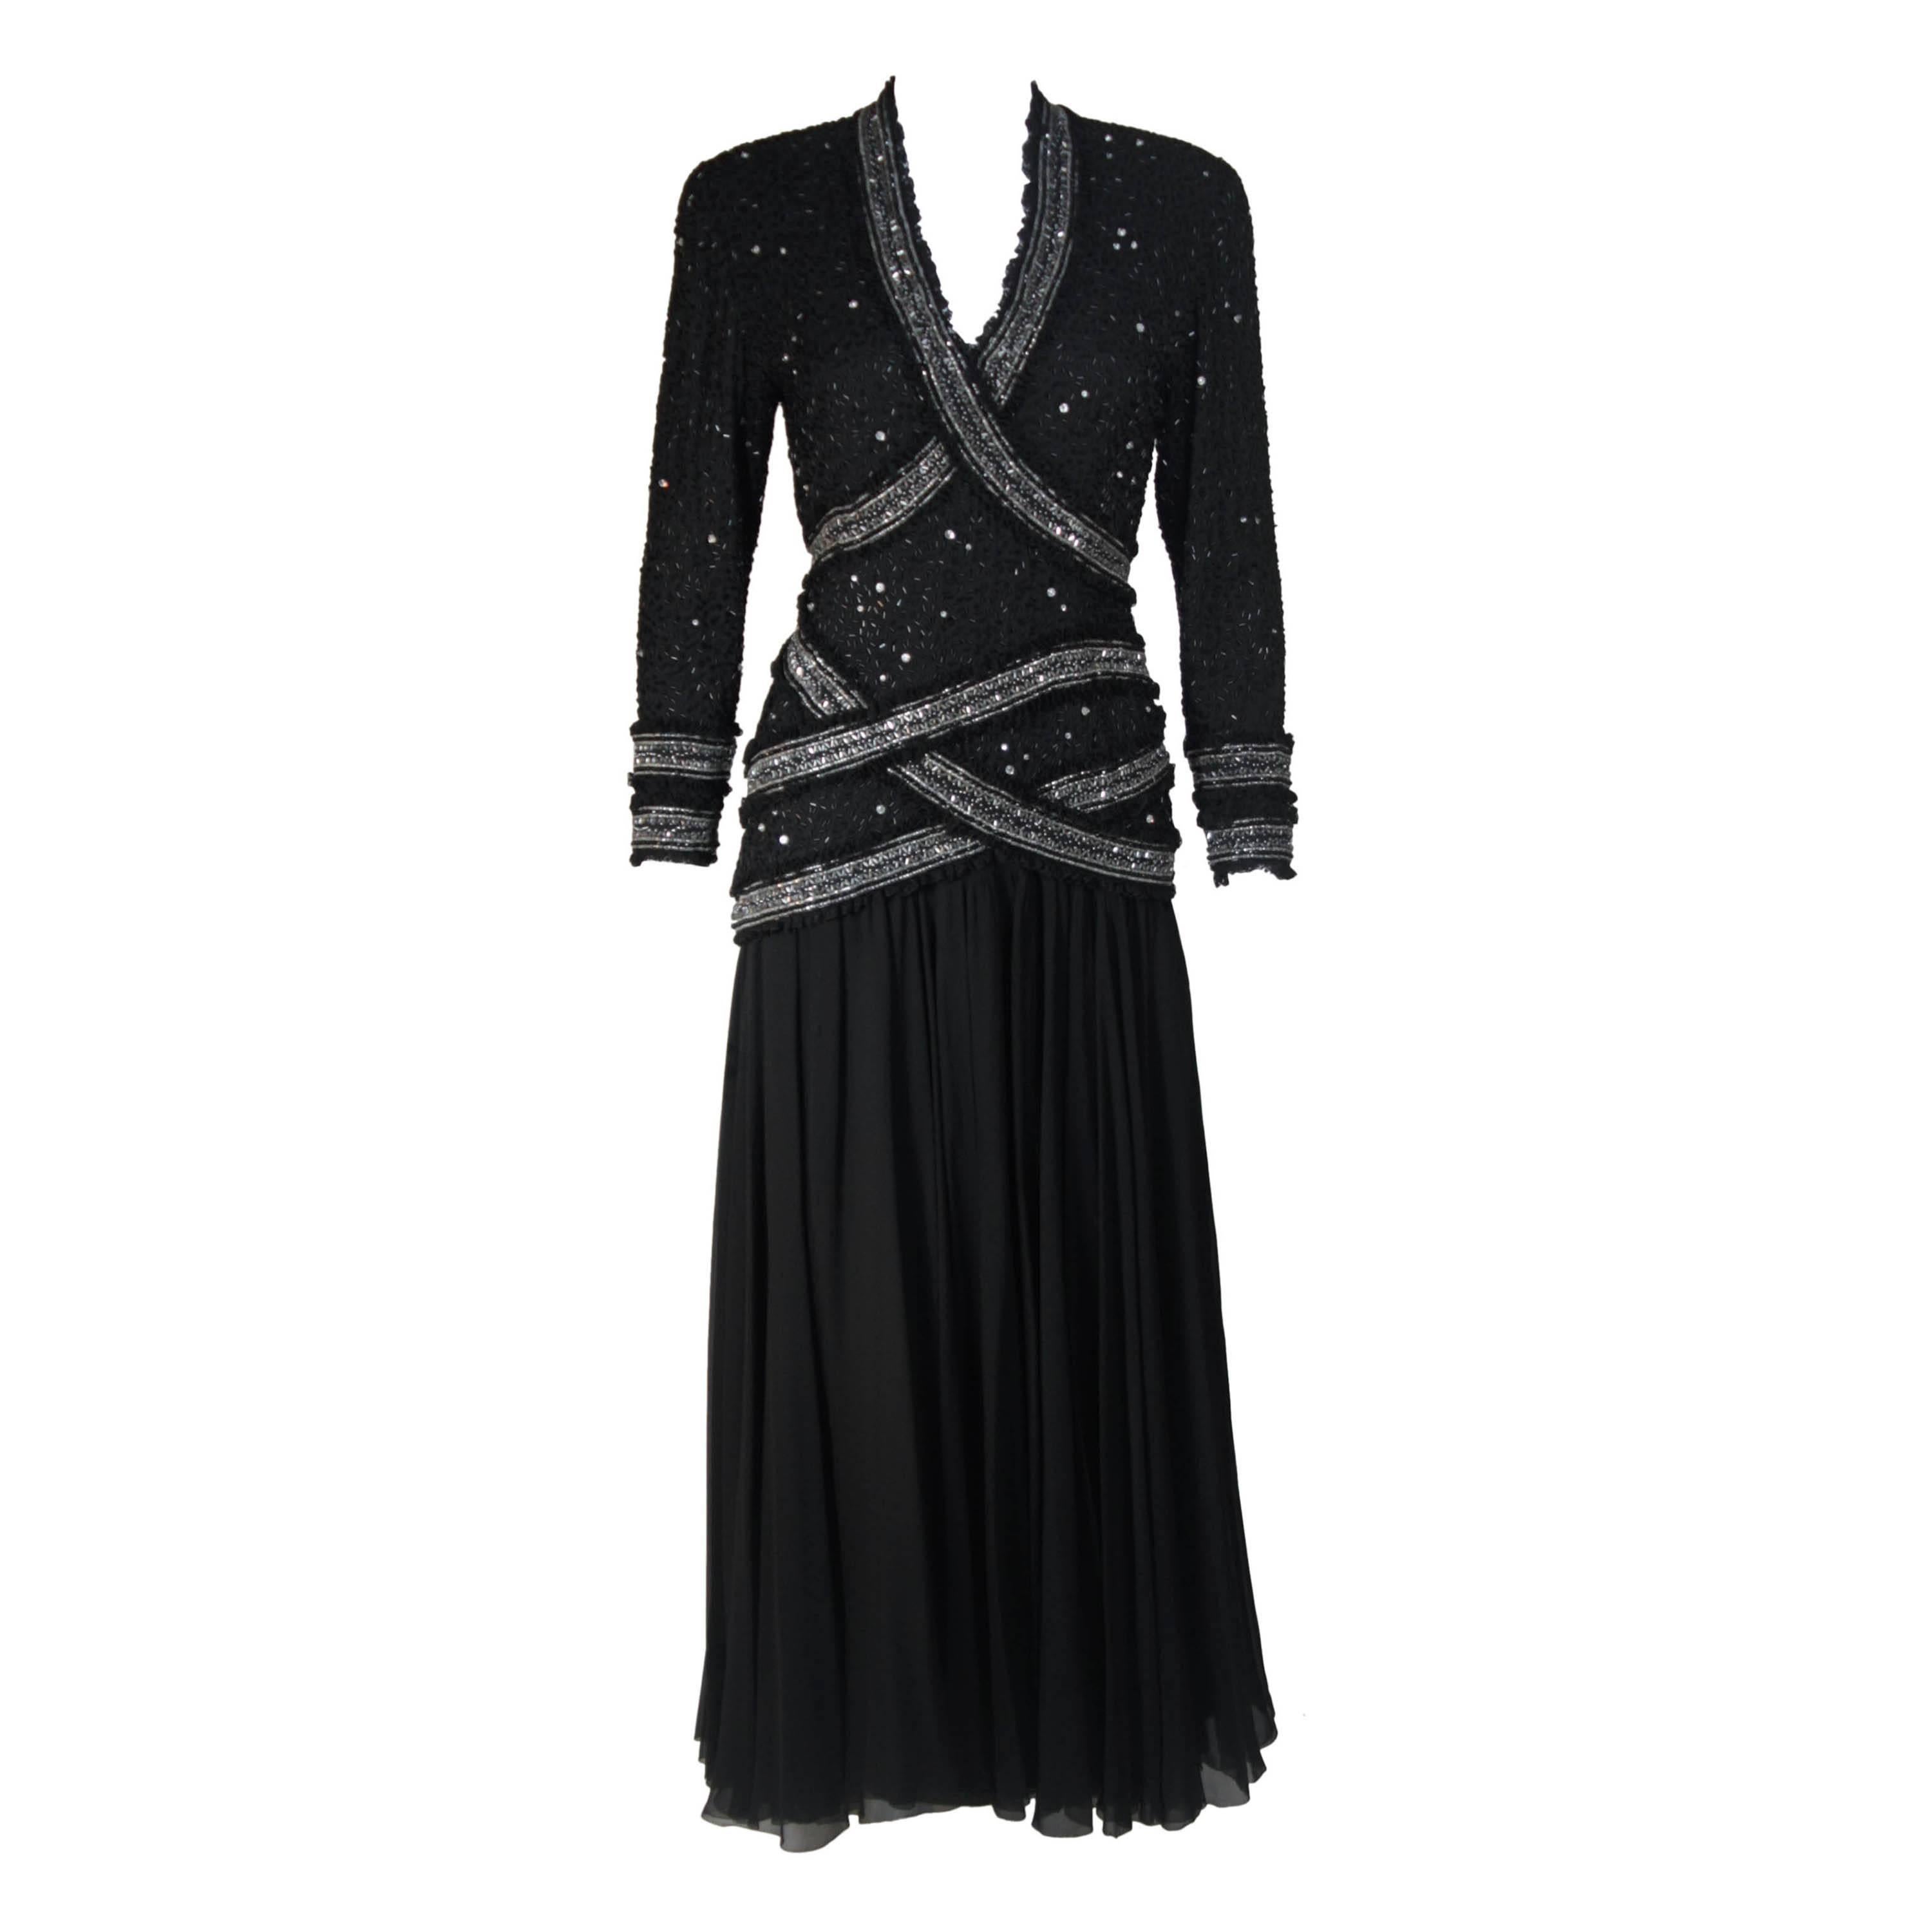 FABRICE NEW YORK COUTURE Black Embellished Chiffon Long Sleeve Gown Size 2 For Sale